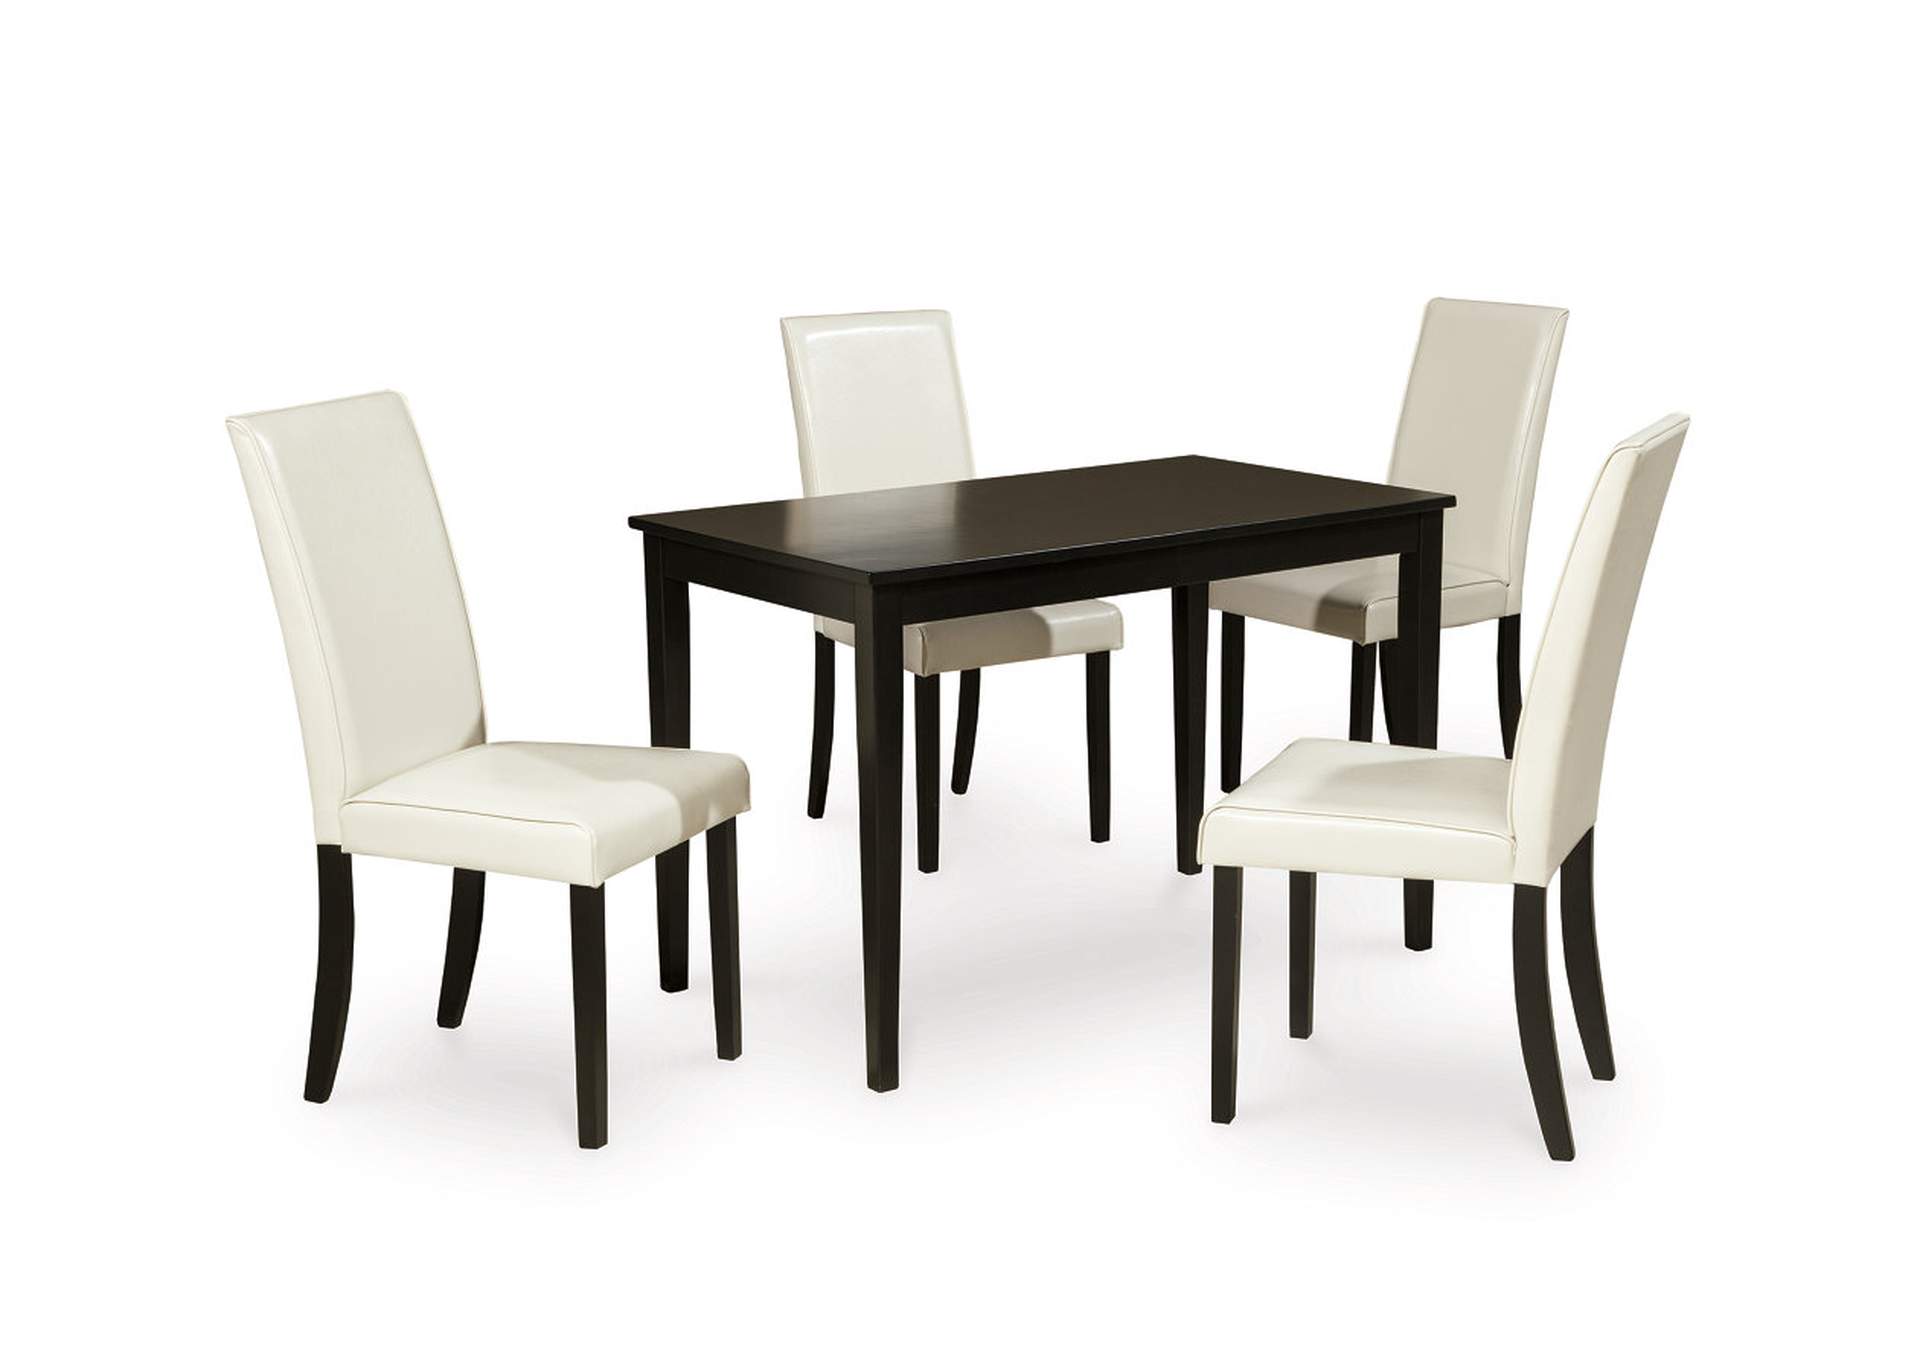 Kimonte Dining Table and 4 Chairs,Signature Design By Ashley